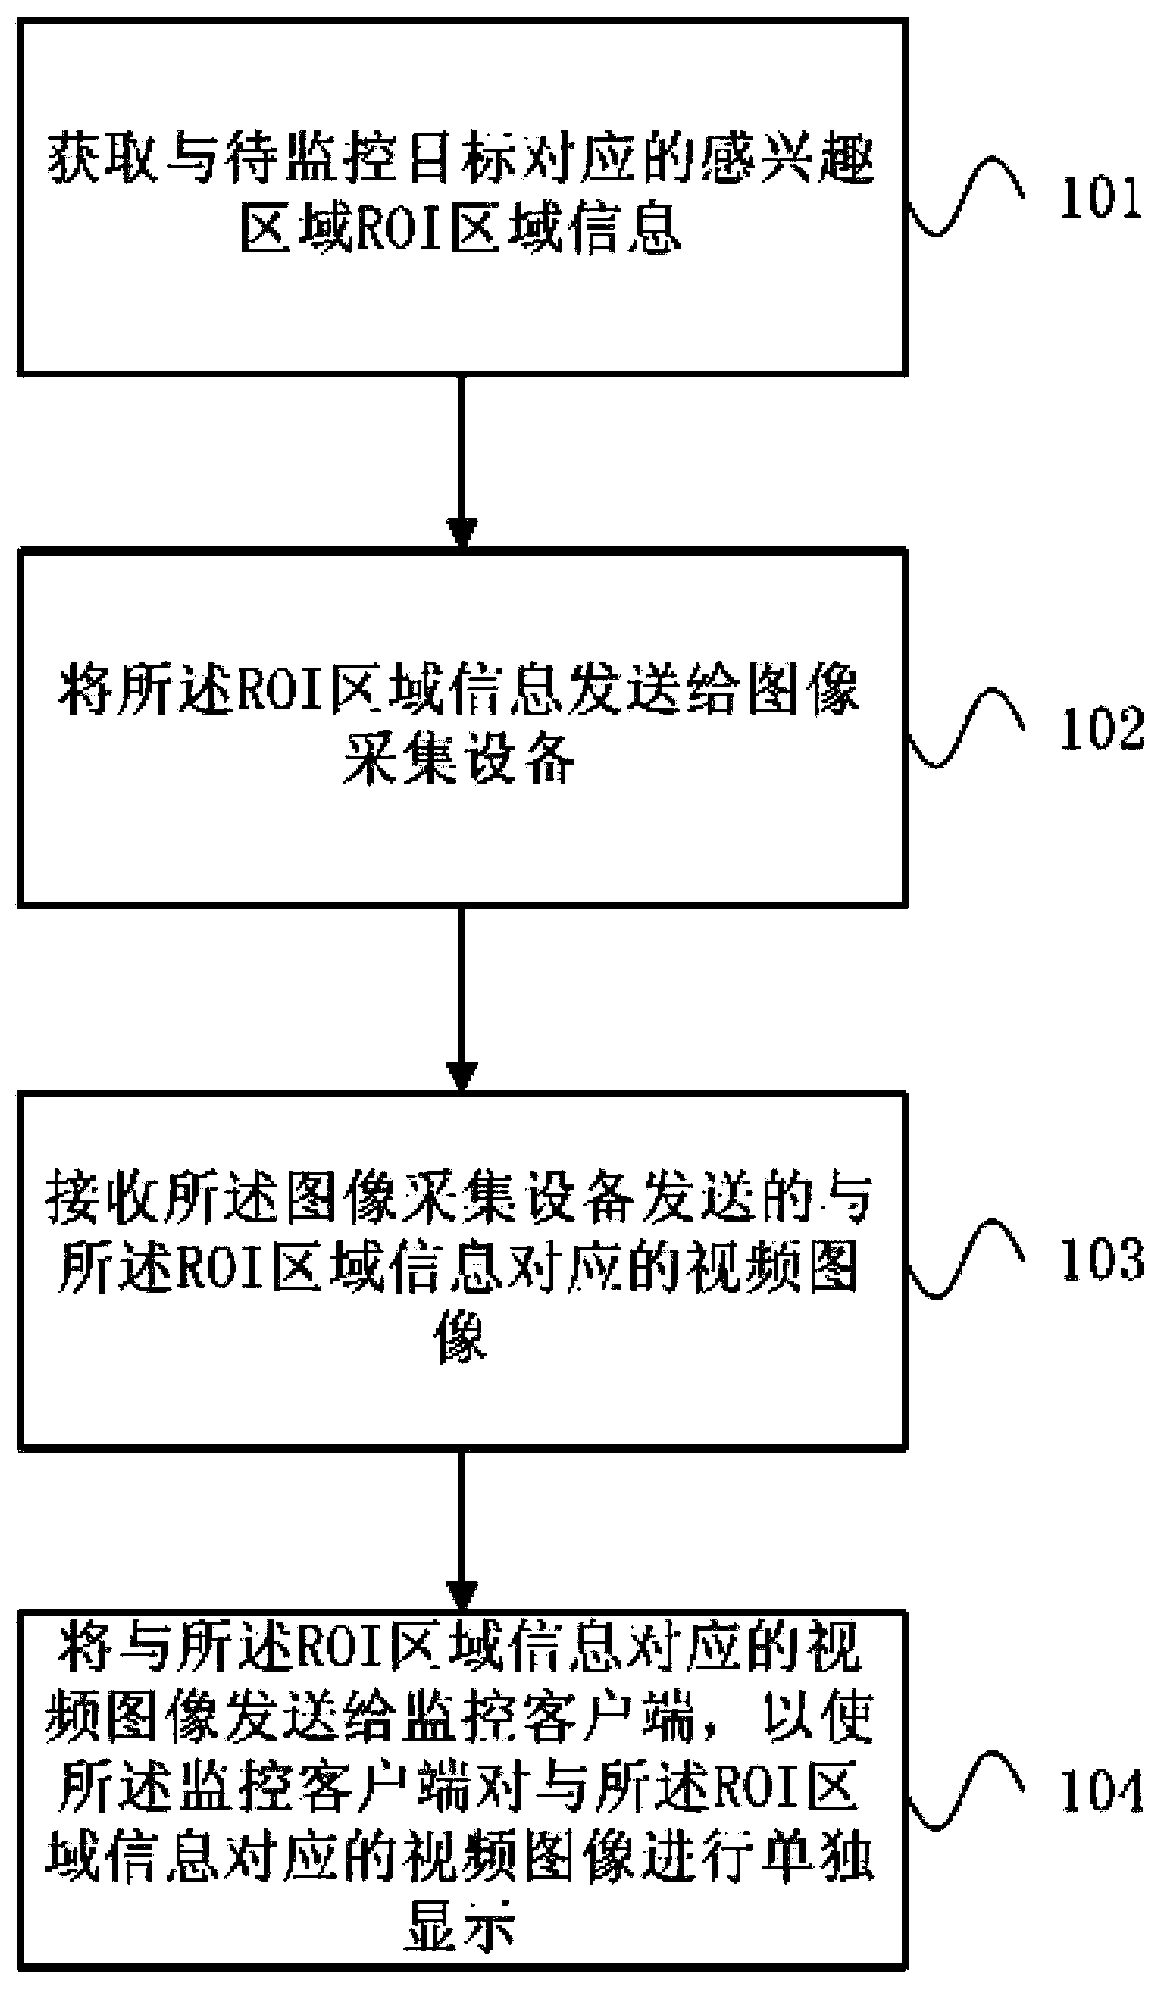 Video monitoring processing method, device and system thereof